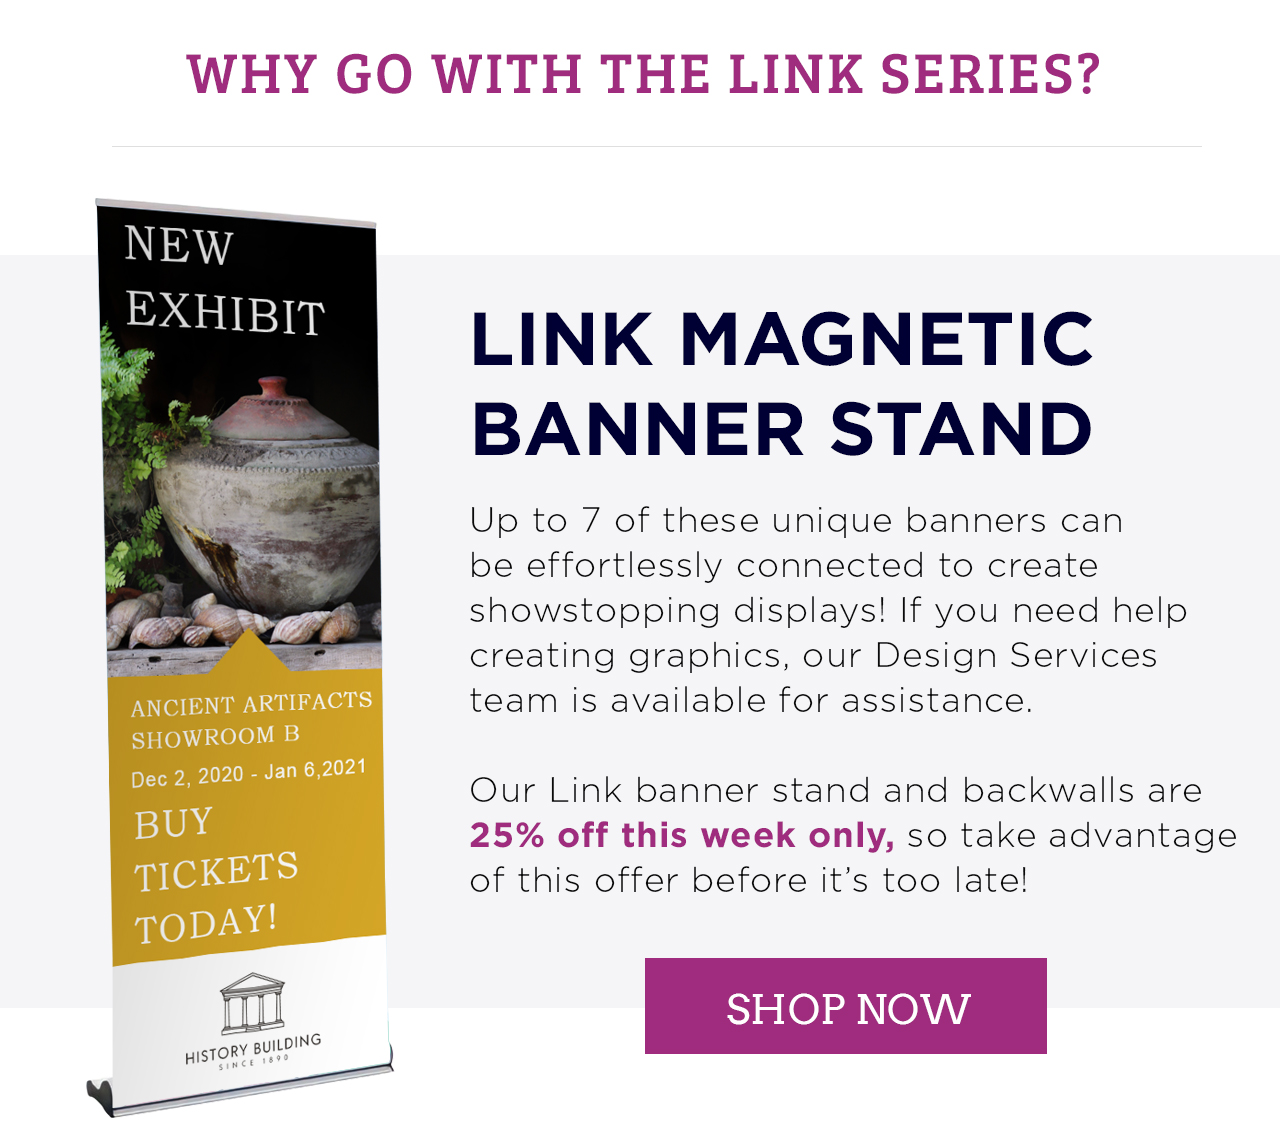 Shop The Link Magnetic Banner Stand!